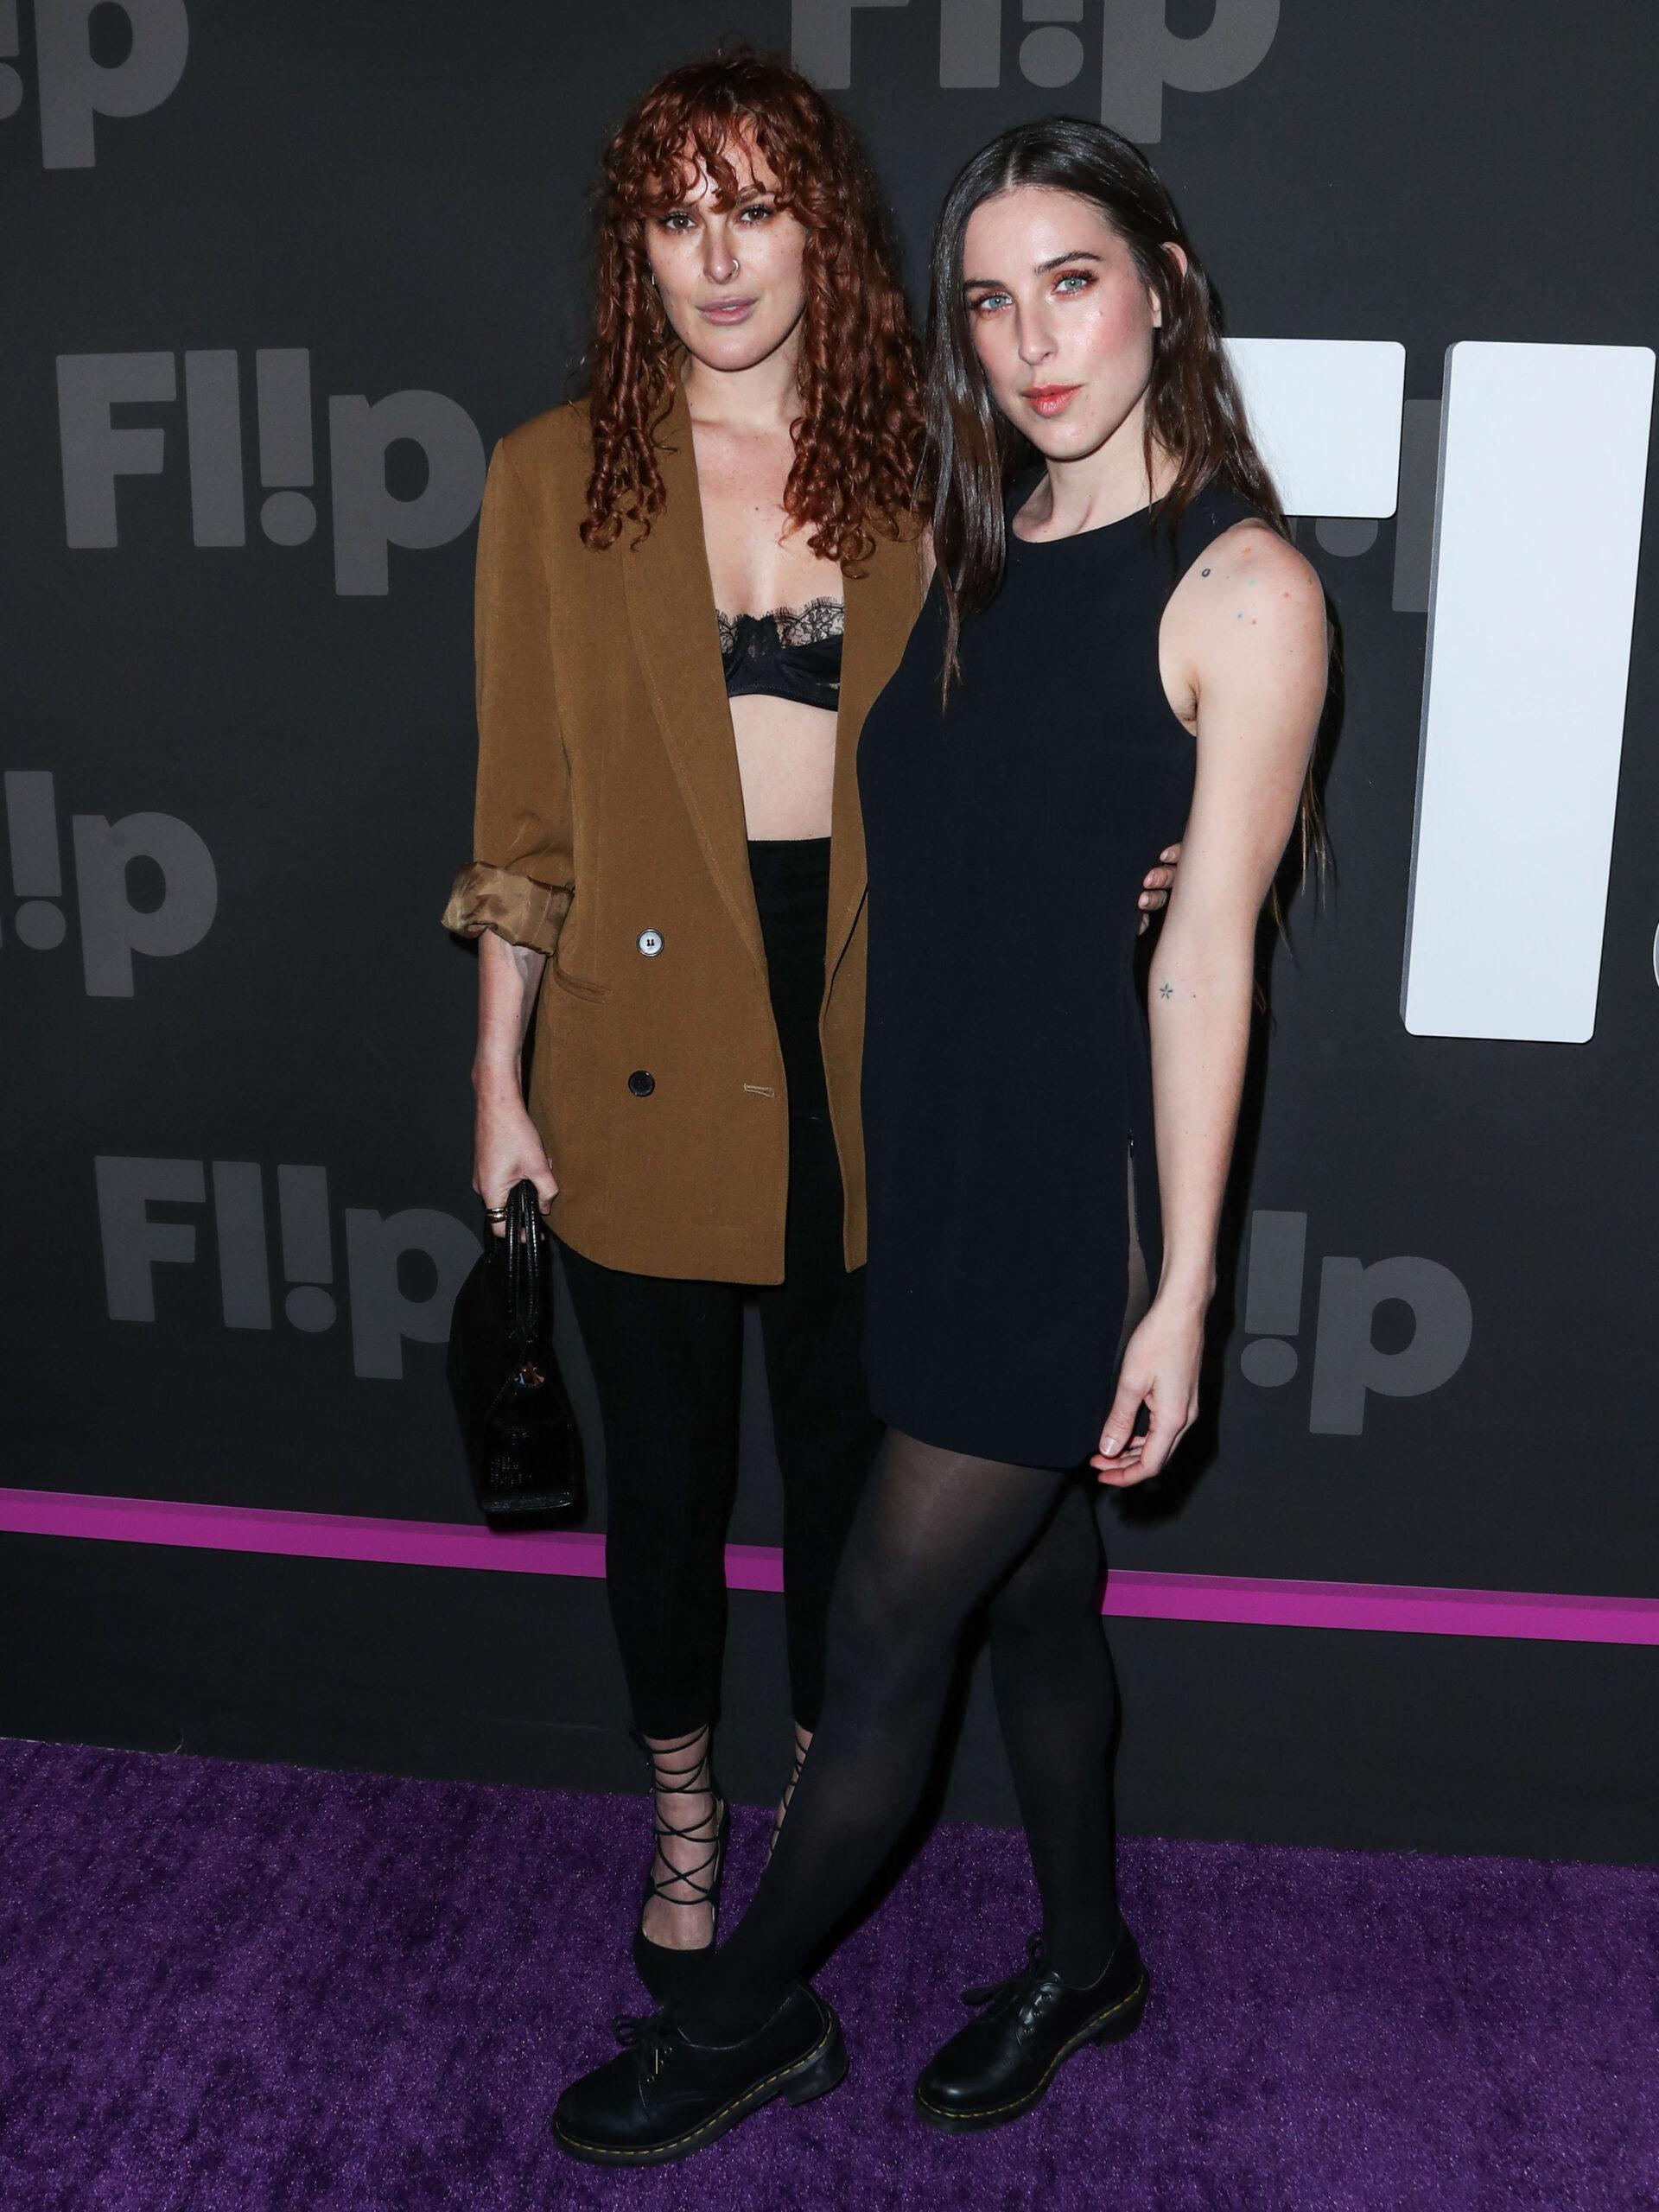 Rumer Willis and Scout Willis at Flip Grand Launch Event